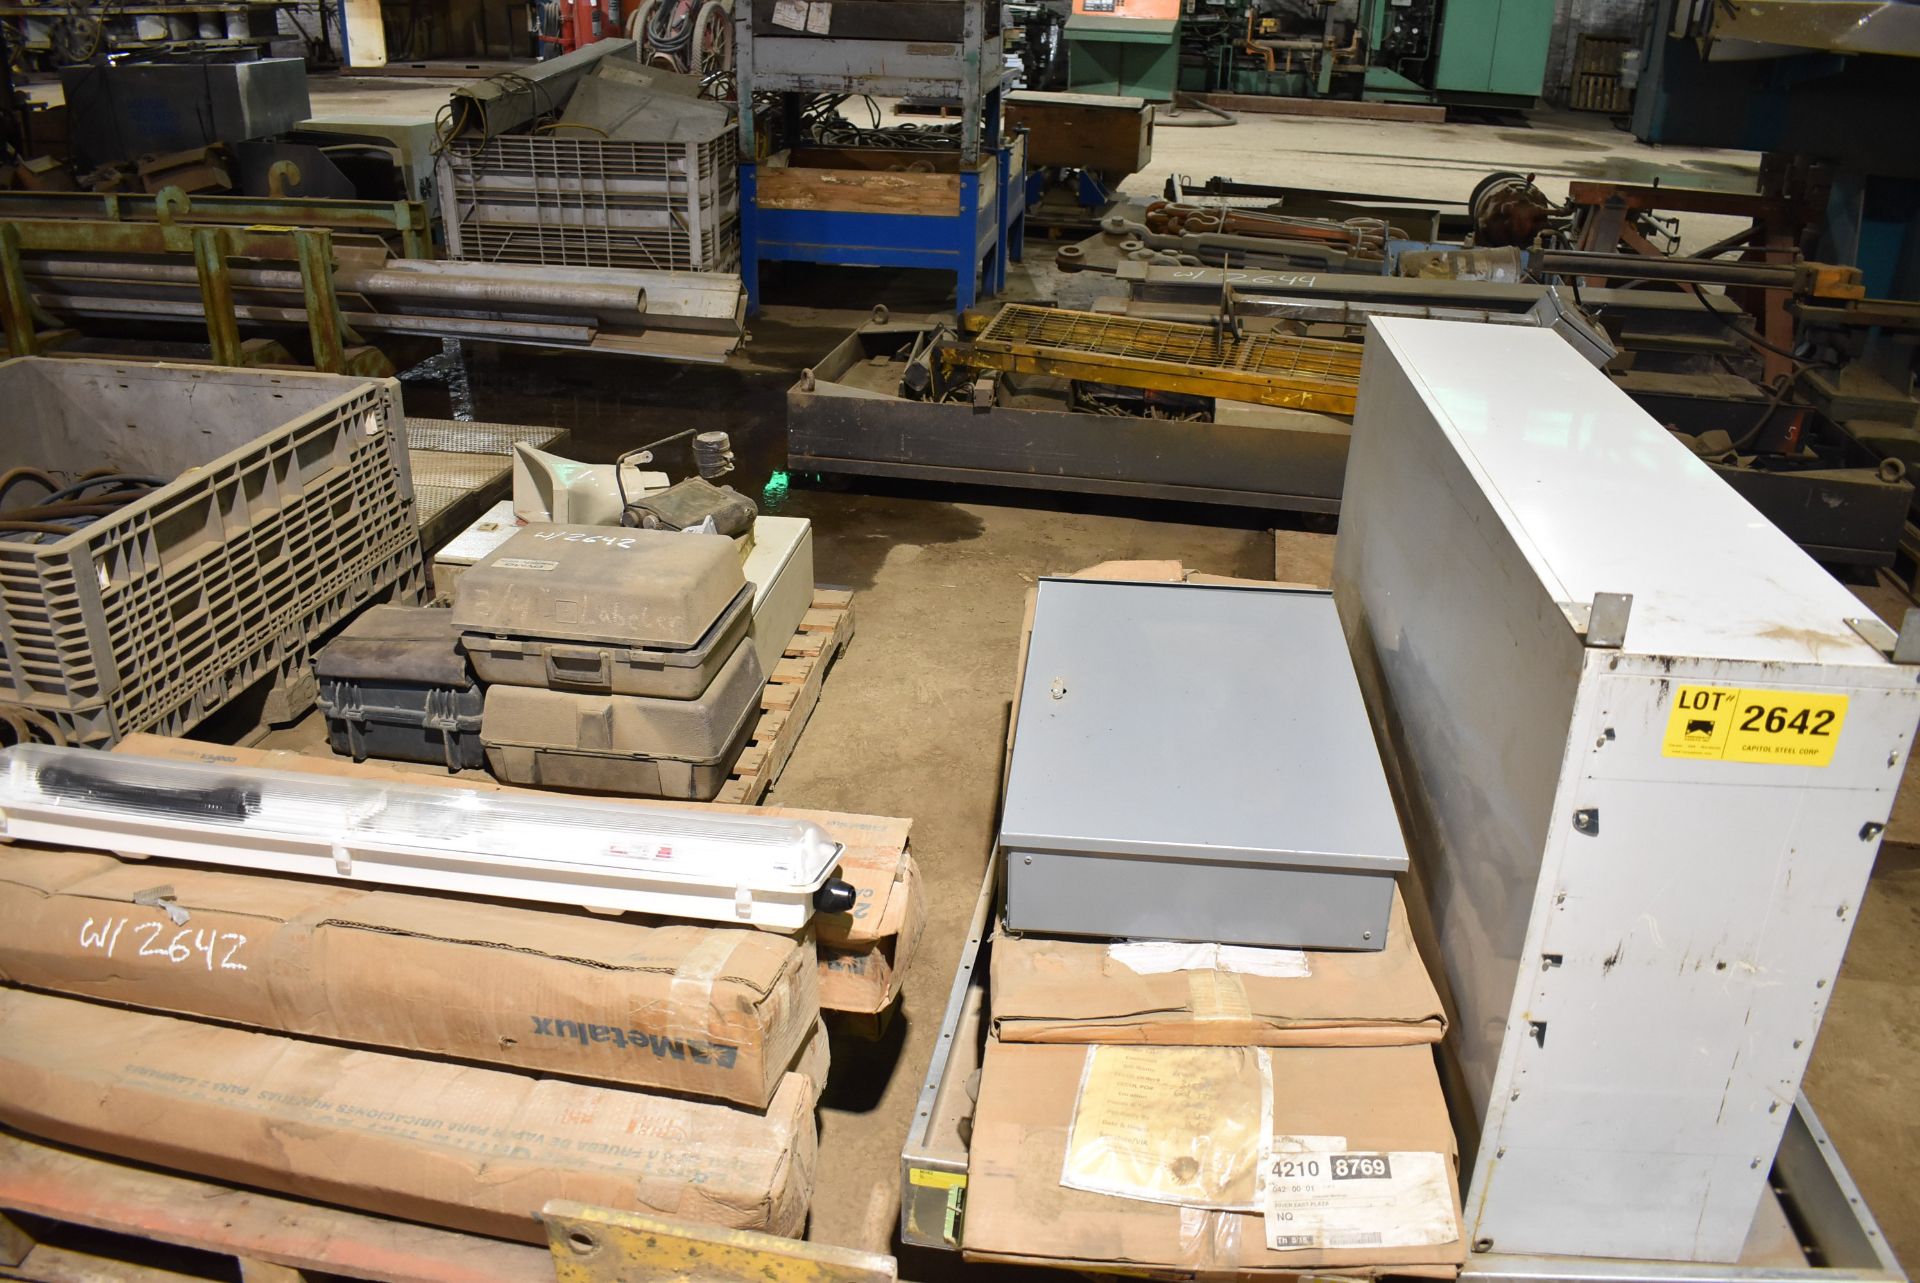 LOT/ (3) SKIDS WITH ELECTRICAL PANELS & BOXES, BREAKER PANEL COVERS, SEALED OVERHEAD LIGHT FIXTURES,